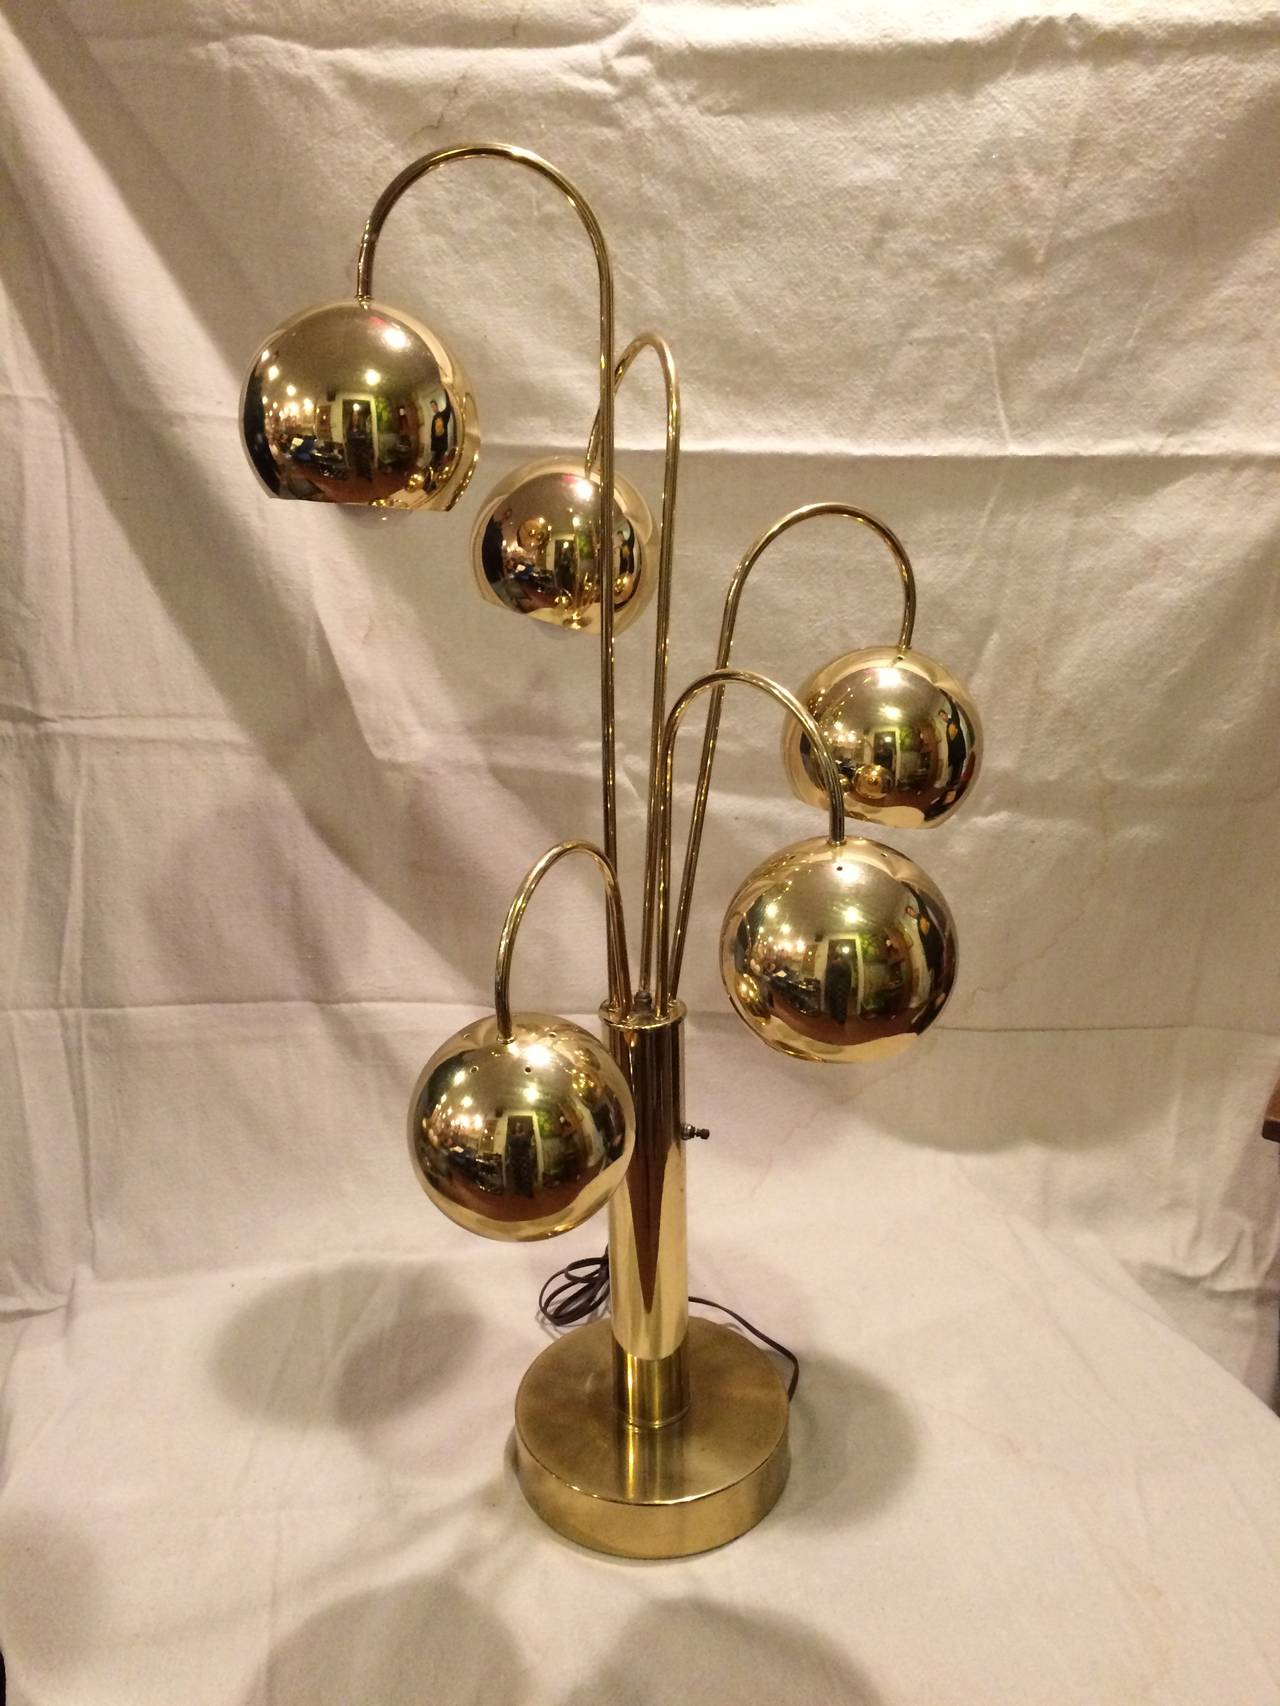 Monumental Pair of brass Mid-Century atomic eyeball table lamps by Sonneman. Excellent condition. Fabulous waterfall design. Three-way switch. First two orbs light up, then the other three,  then all five. Arms are somewhat adjustable so can vary in